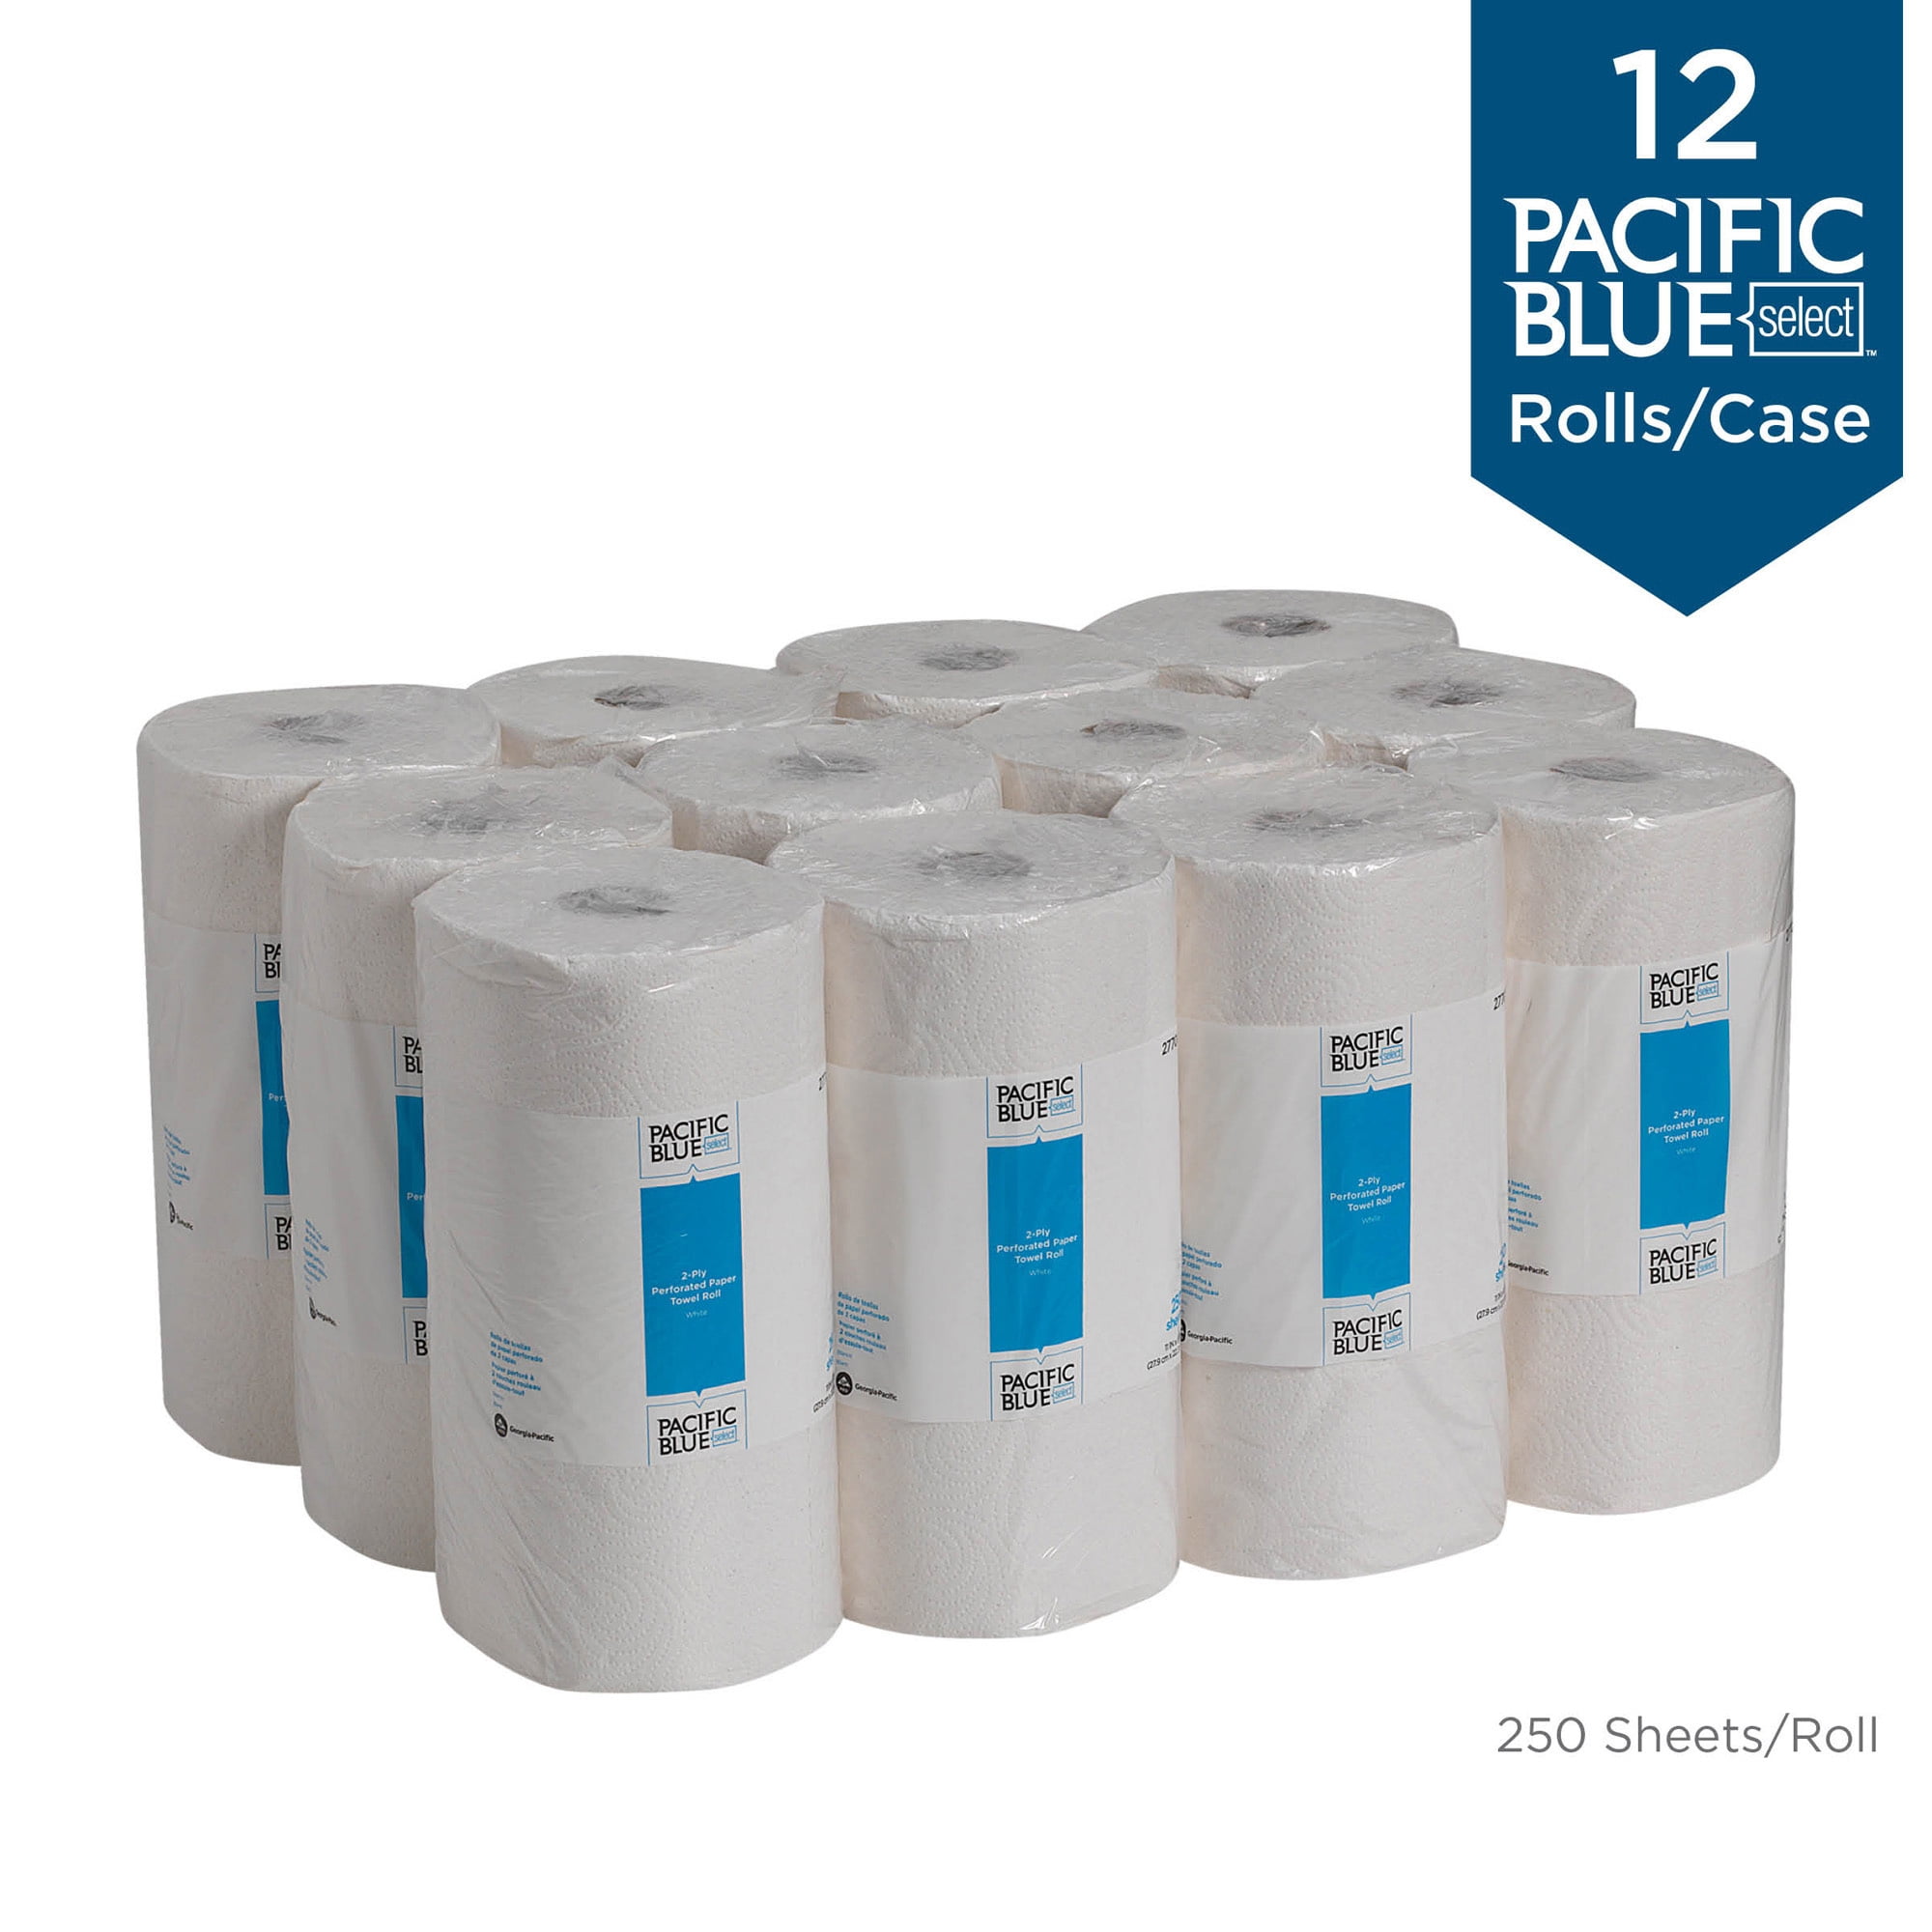 Pacific Blue Select Multifold Premium 2-Ply Paper Towels by GP PRO 